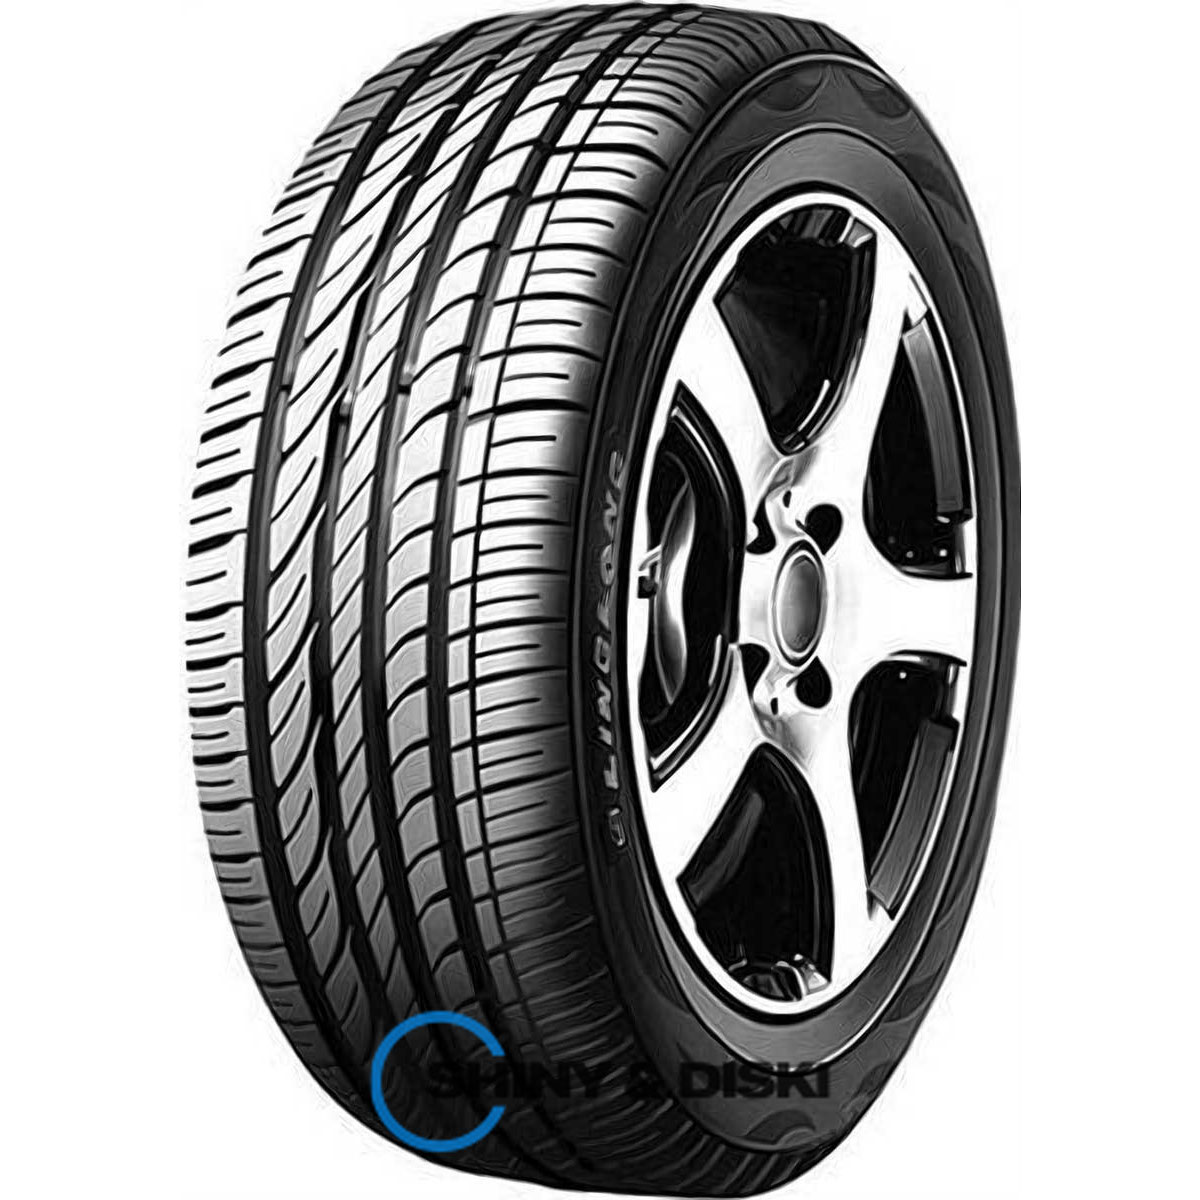 ling long greenmax ecotouring 155/65 r13 73t